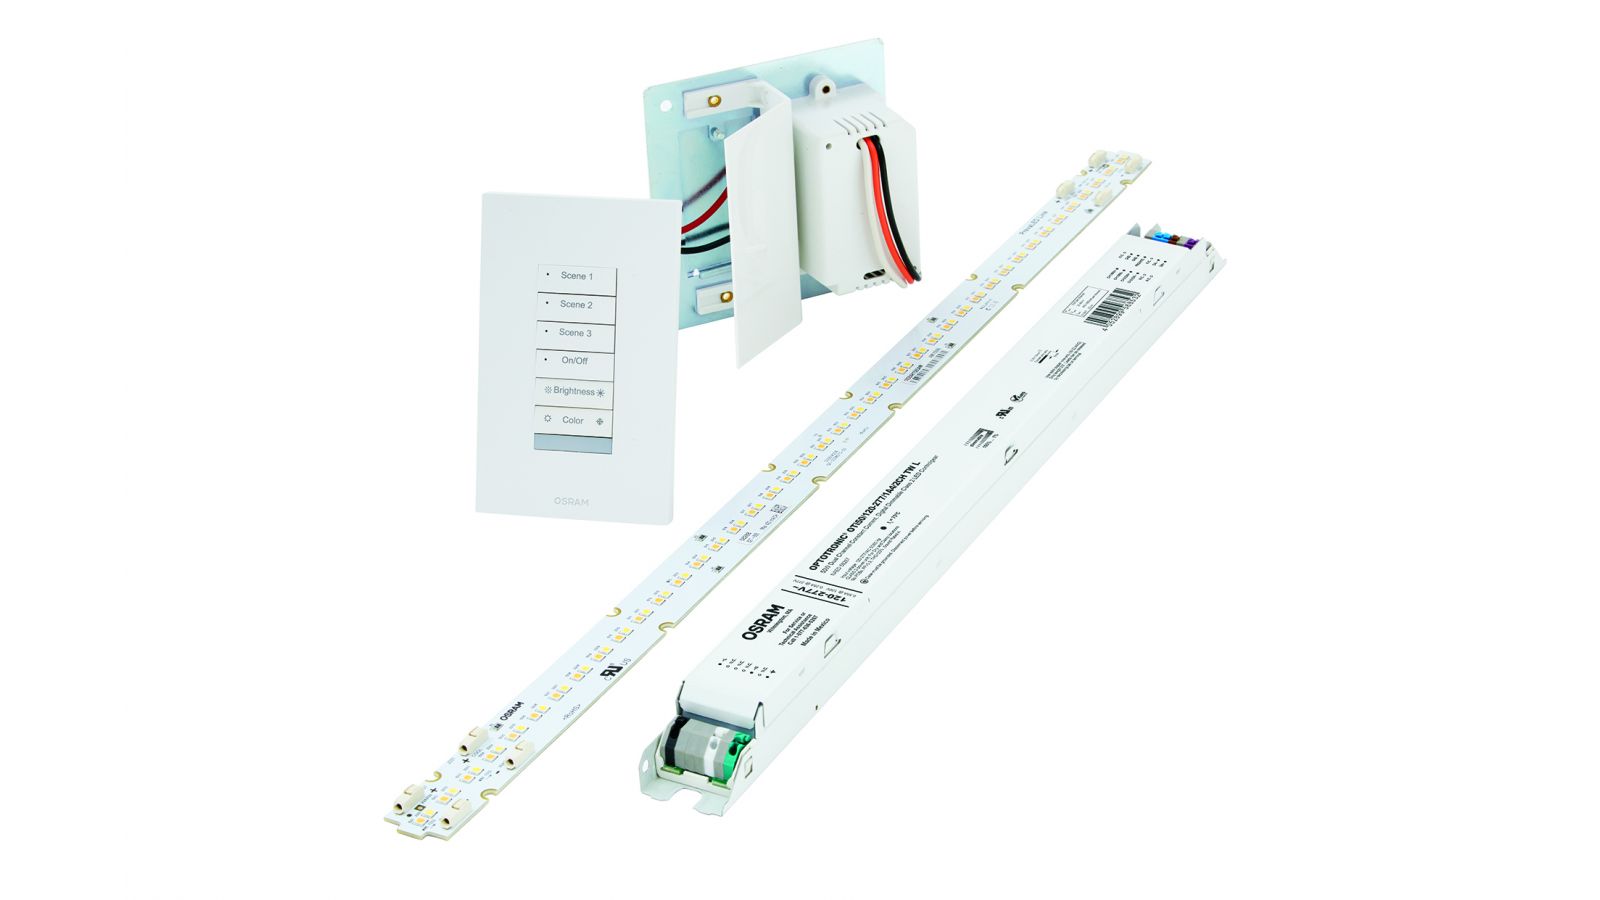 OSRAM Tunable White System